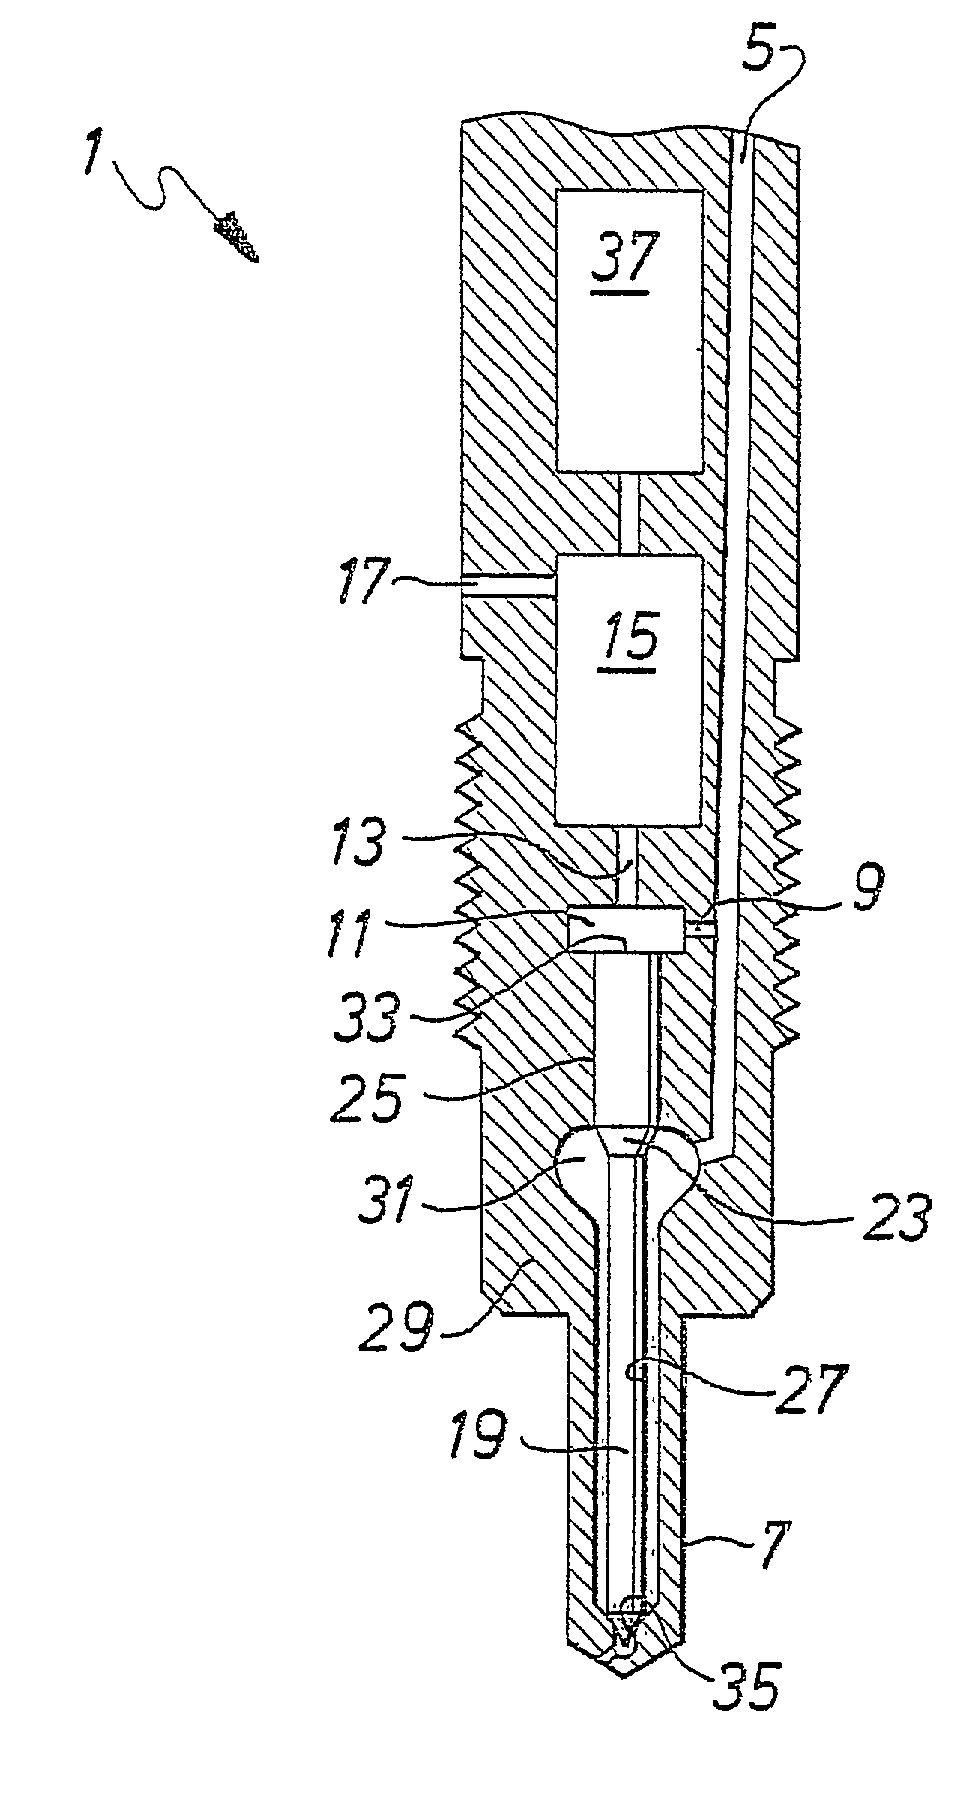 Control valve for an injector of a fuel Injection system for internal combustion engines with pressure amplification in the control chamber